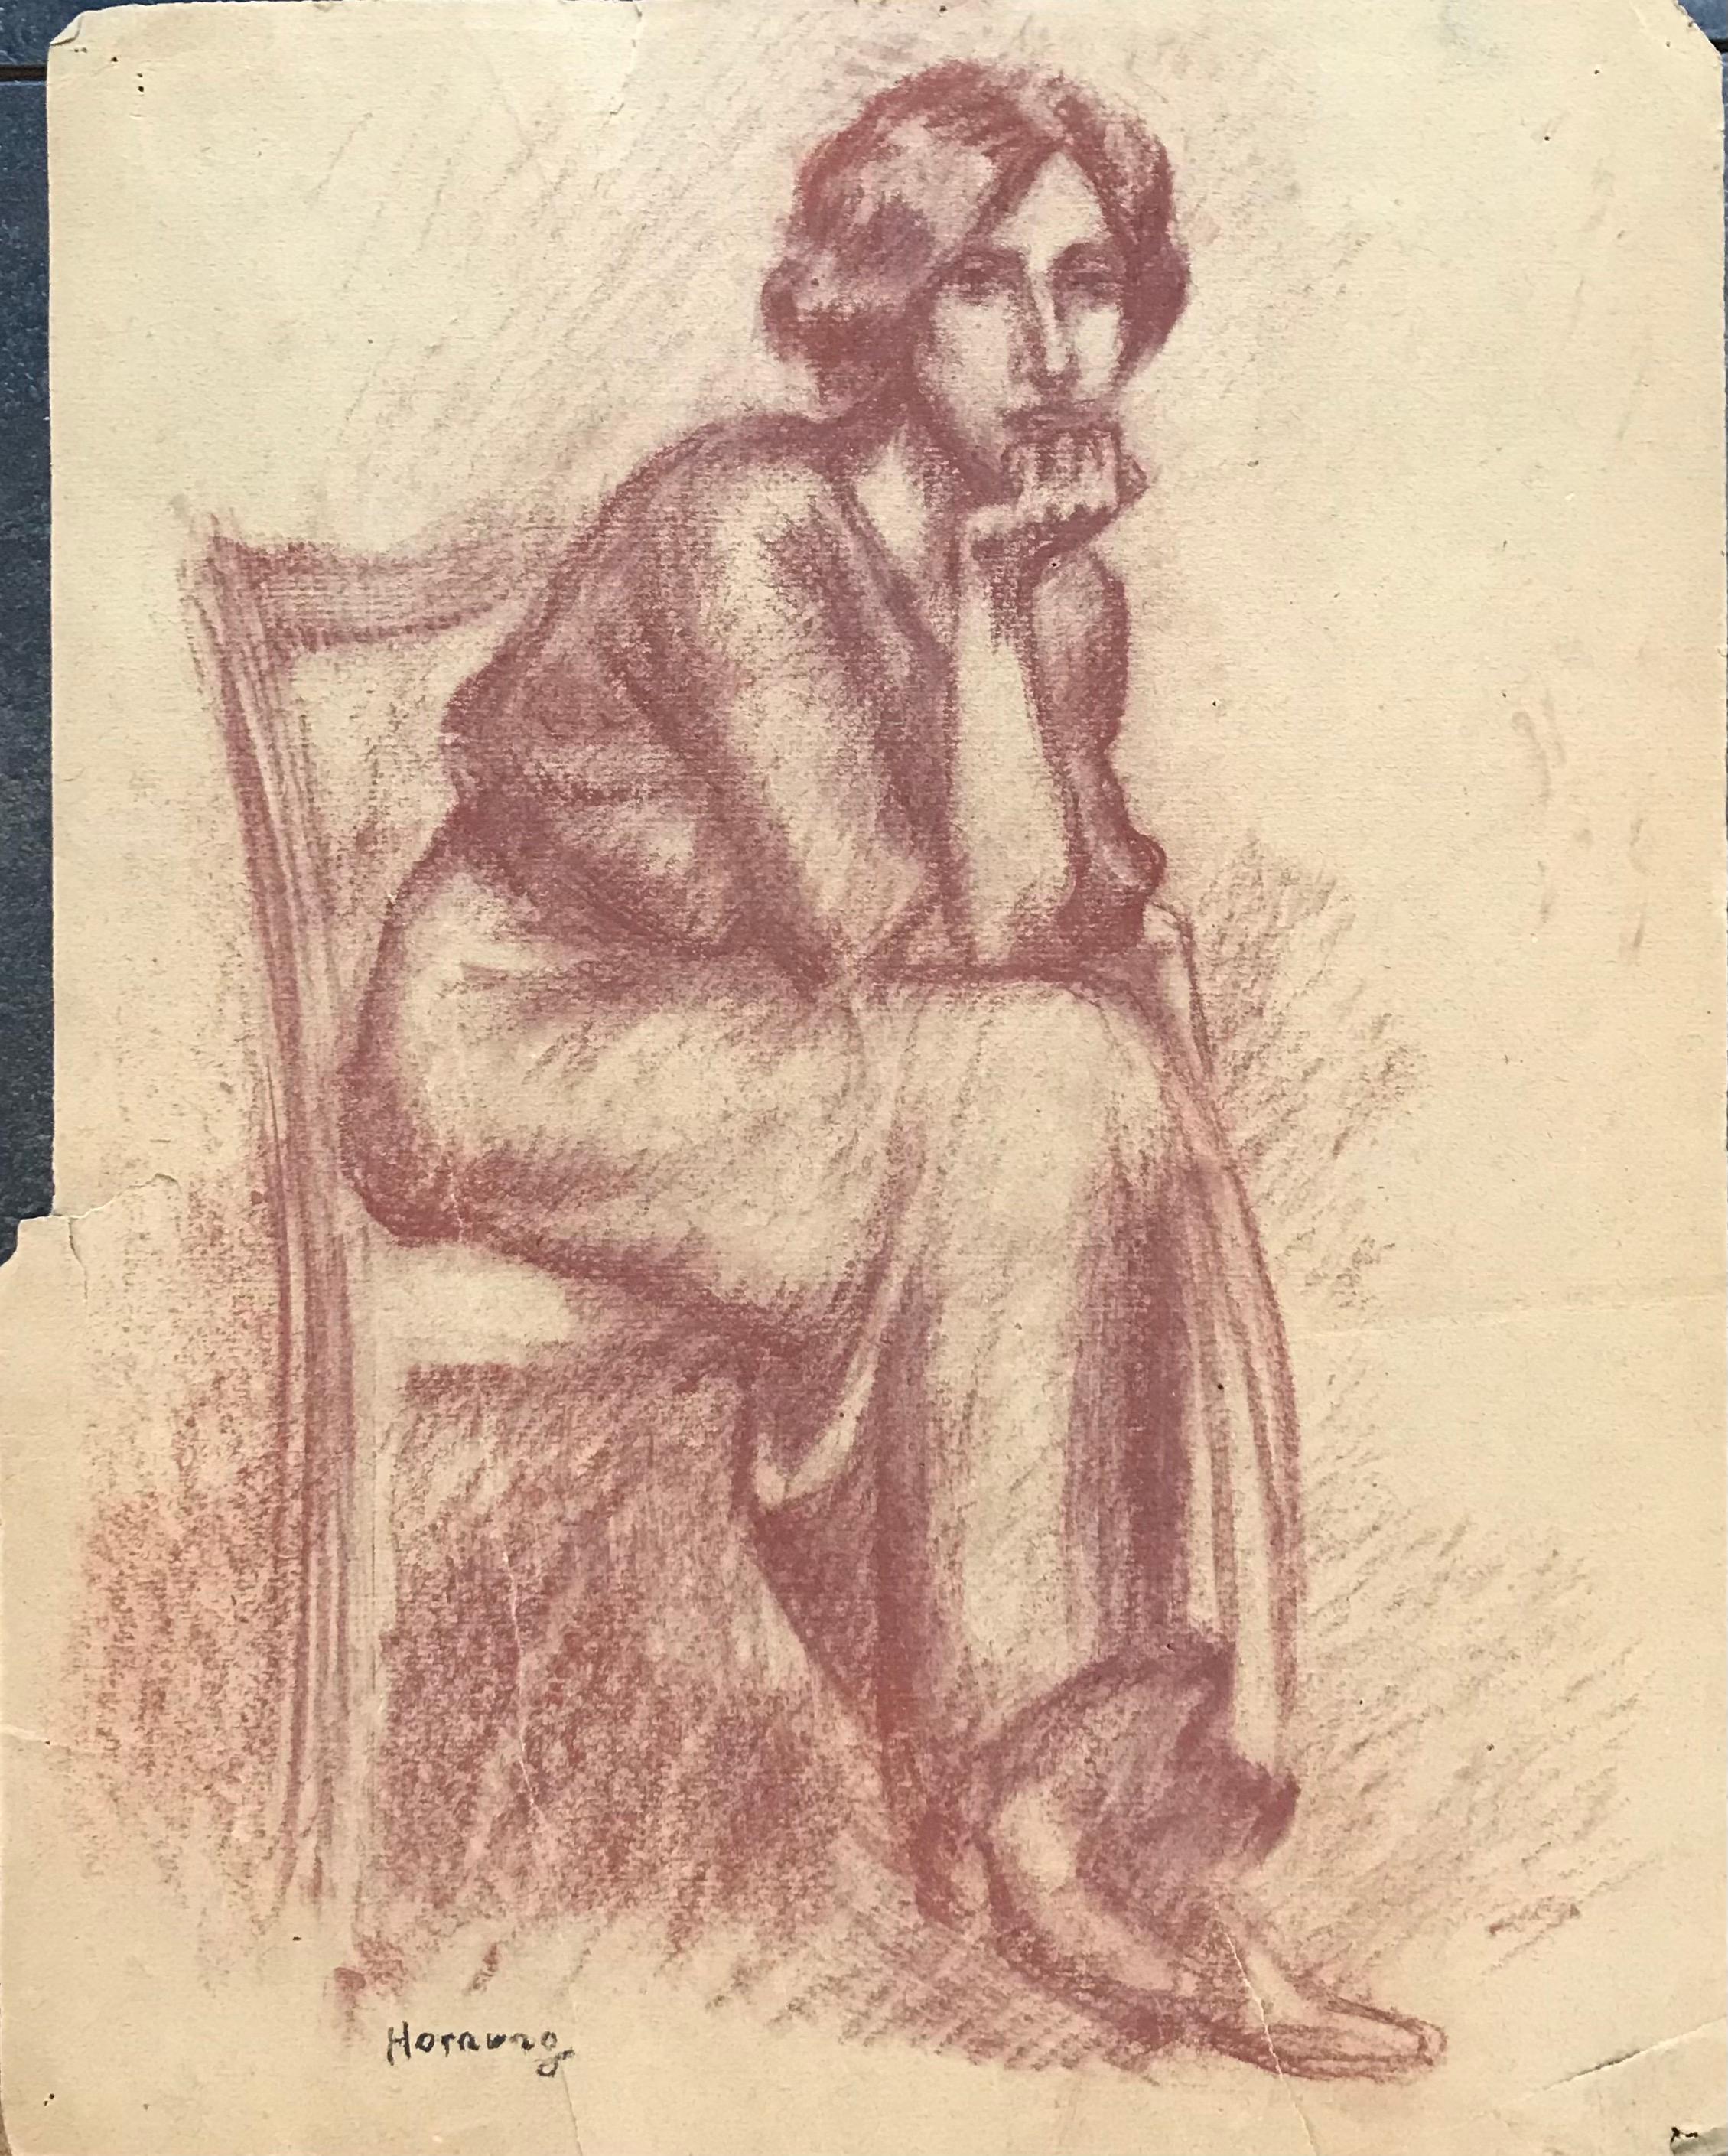 Charles Émile Hornung Figurative Art - Pensive young woman by Emile Hornung - Pastel on paper 37x29 cm